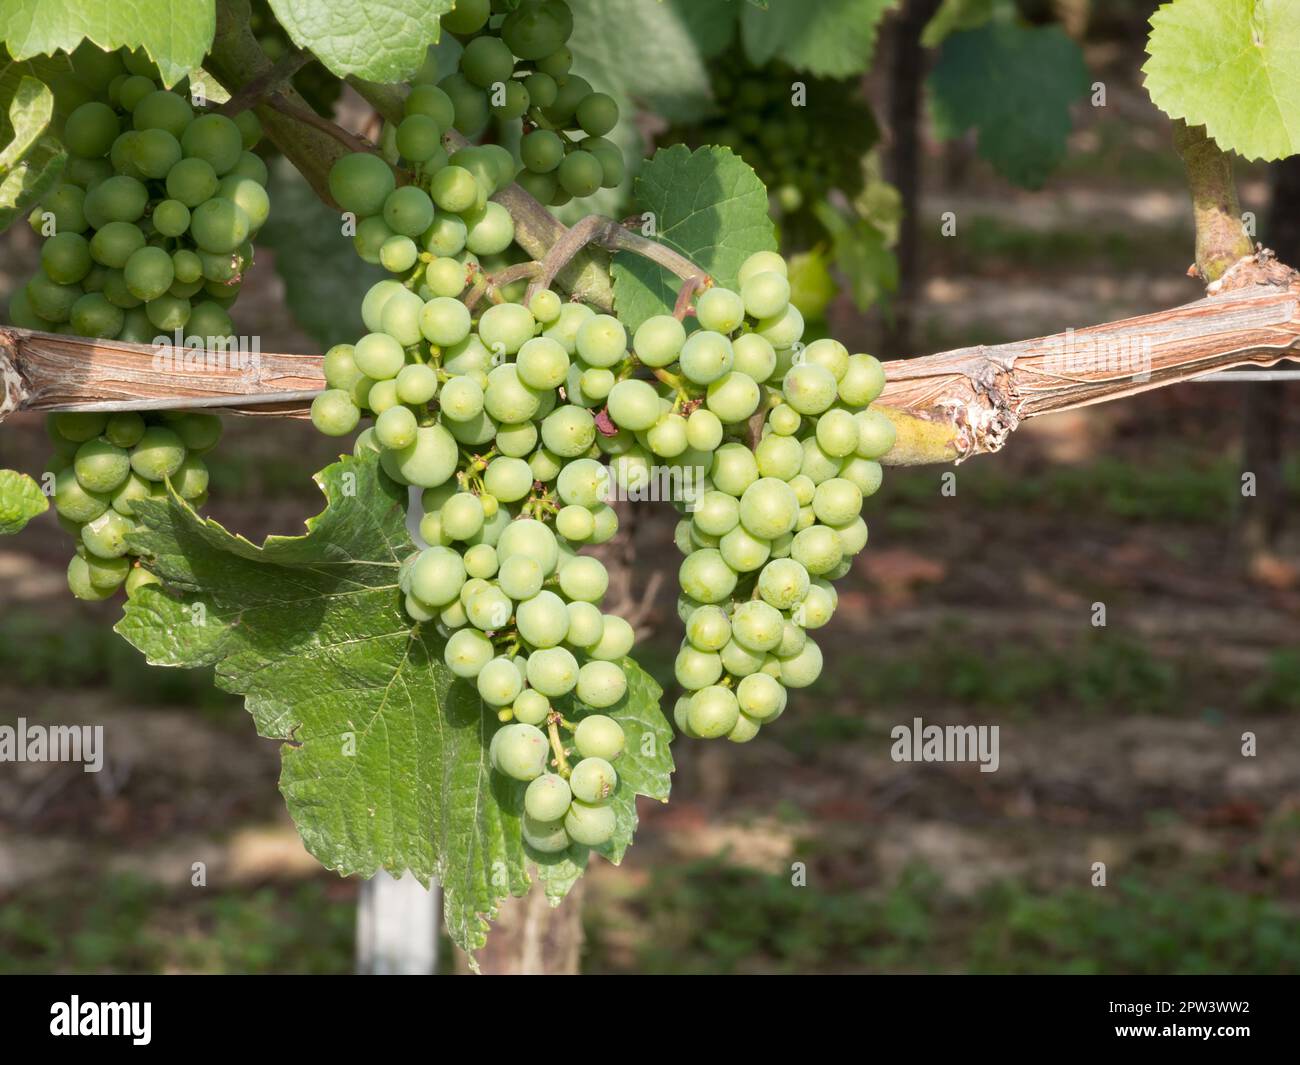 Delicious grapes with berries on the vine Stock Photo